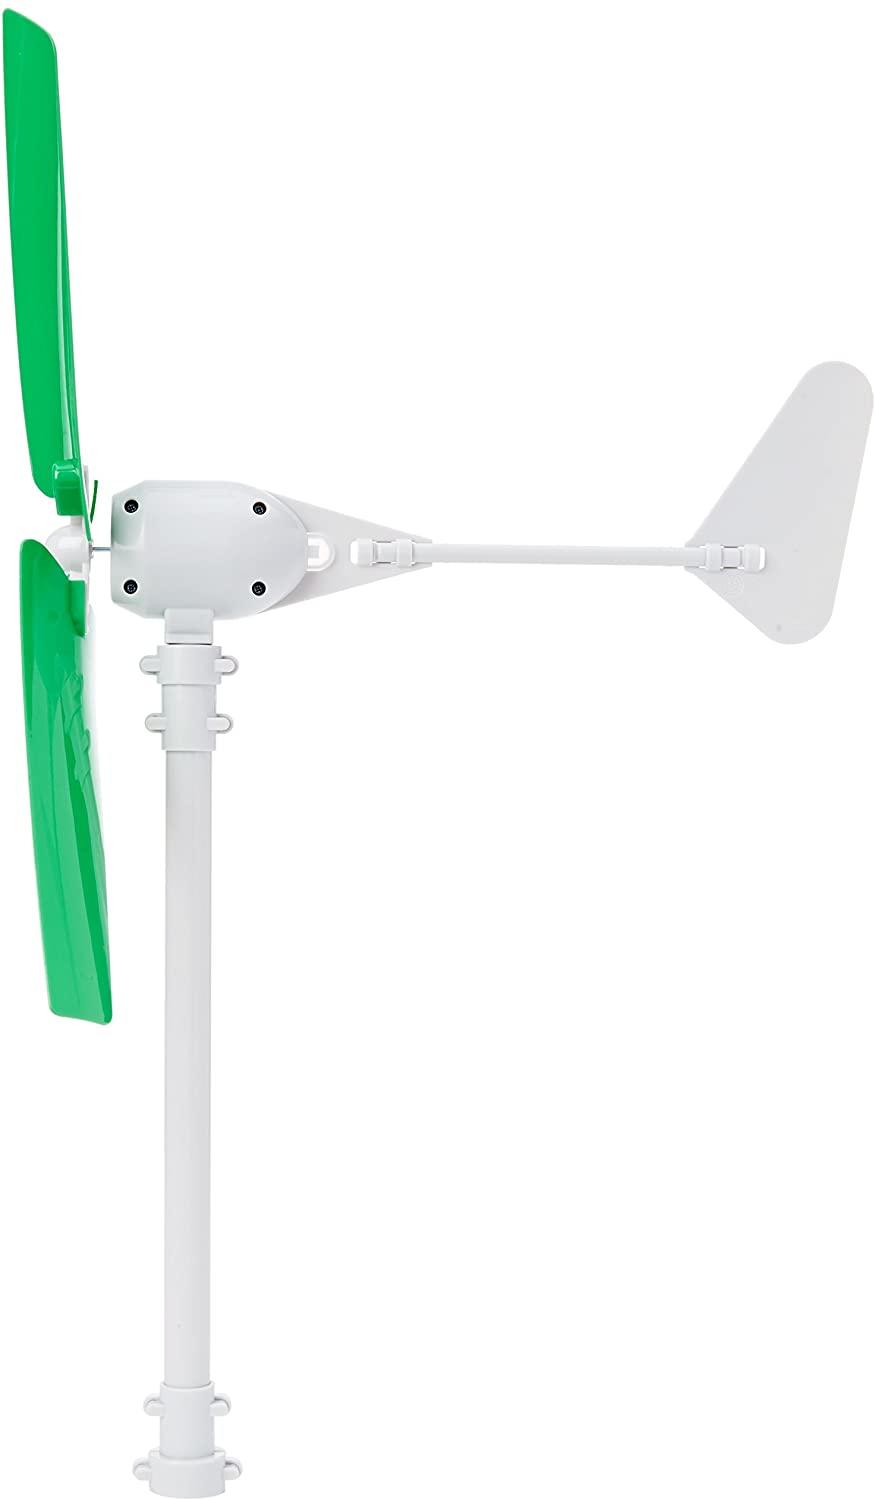 4M Build Your Own Wind Turbine